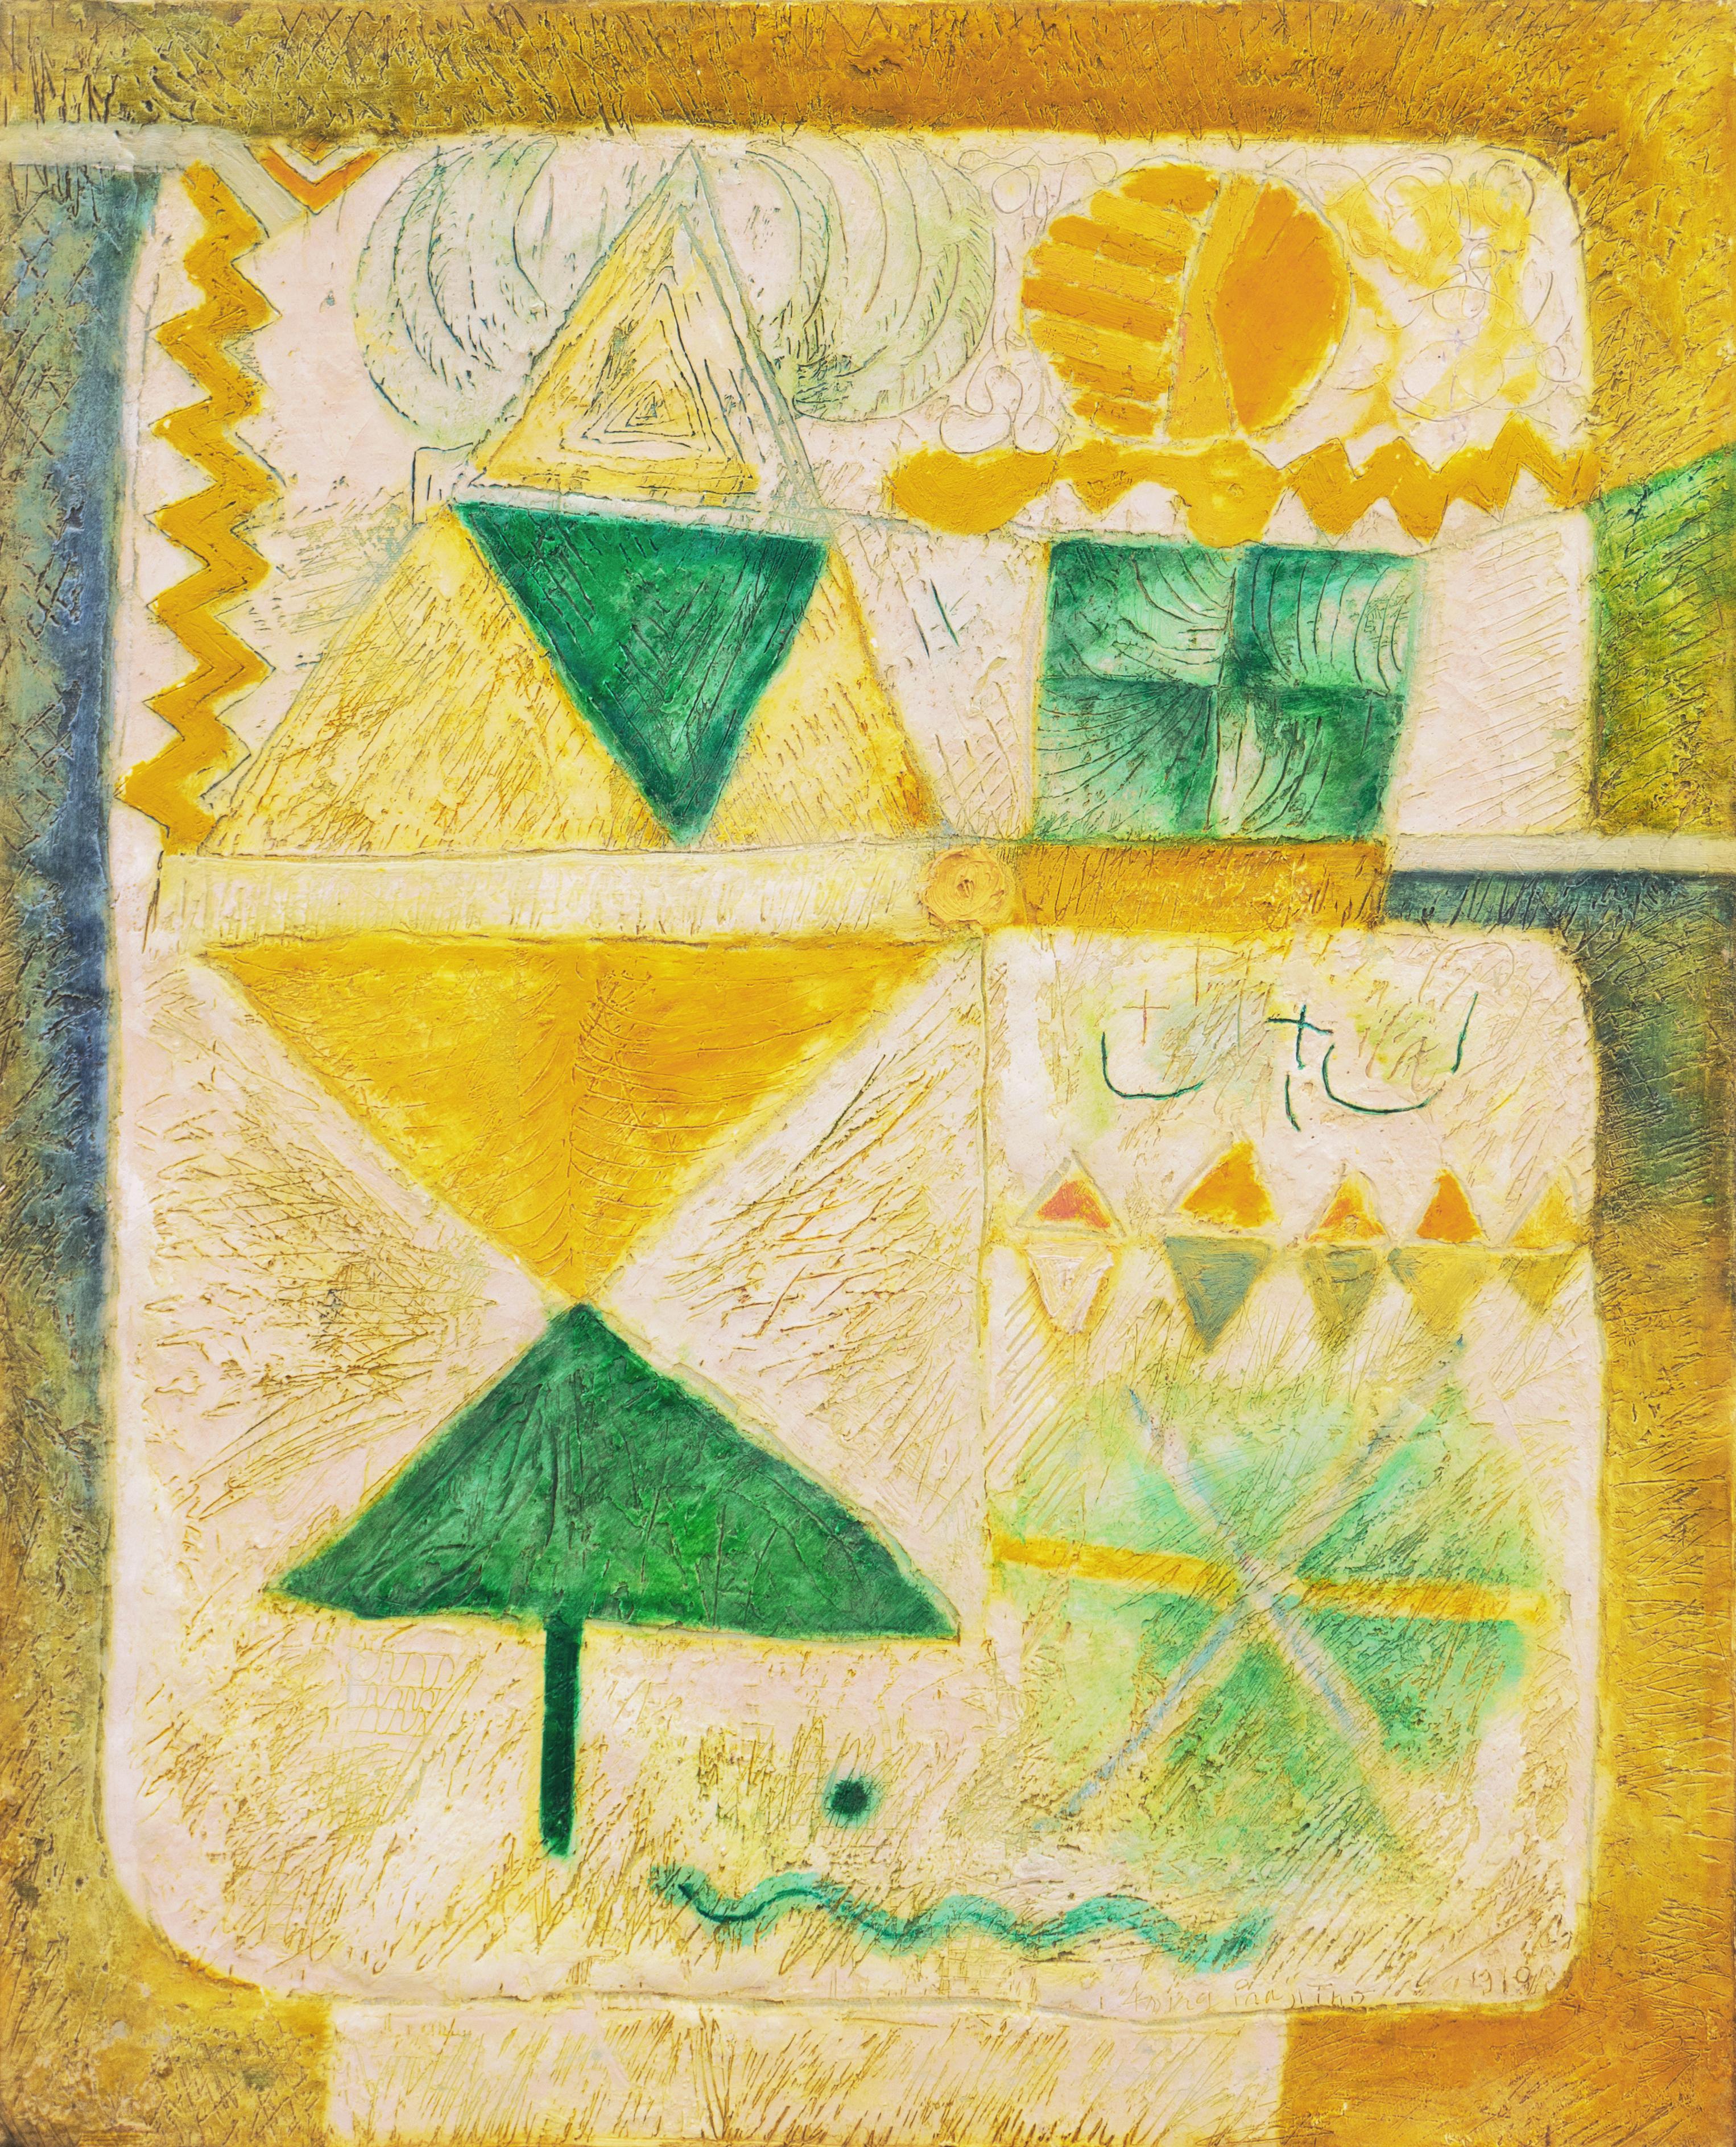 Aming Prayitno Abstract Painting - 'Organic Abstract in Yellow and Green', Jakarta, Indonesian Art Academy, Ghent